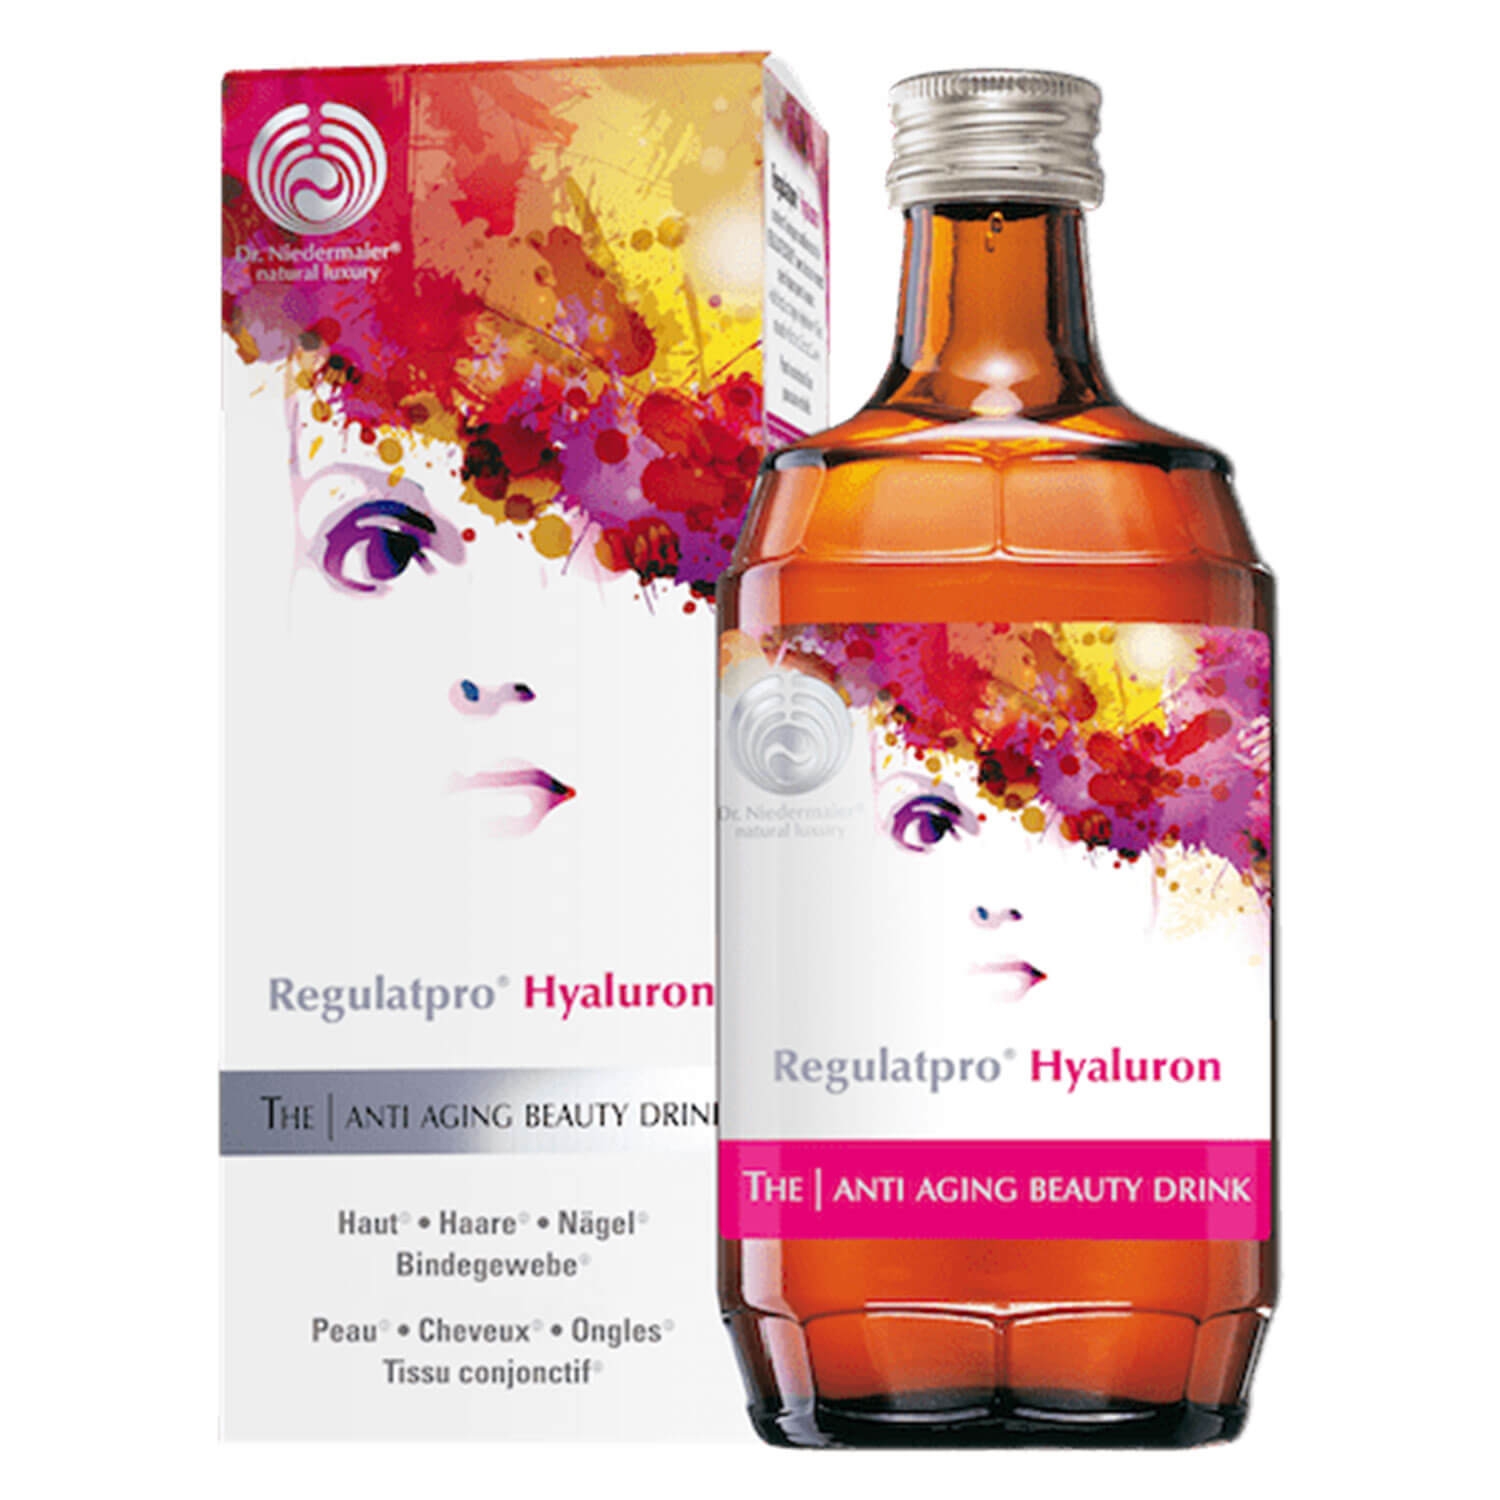 Product image from Regulatpro® - Hyaluron The Anti Aging Beauty Drink